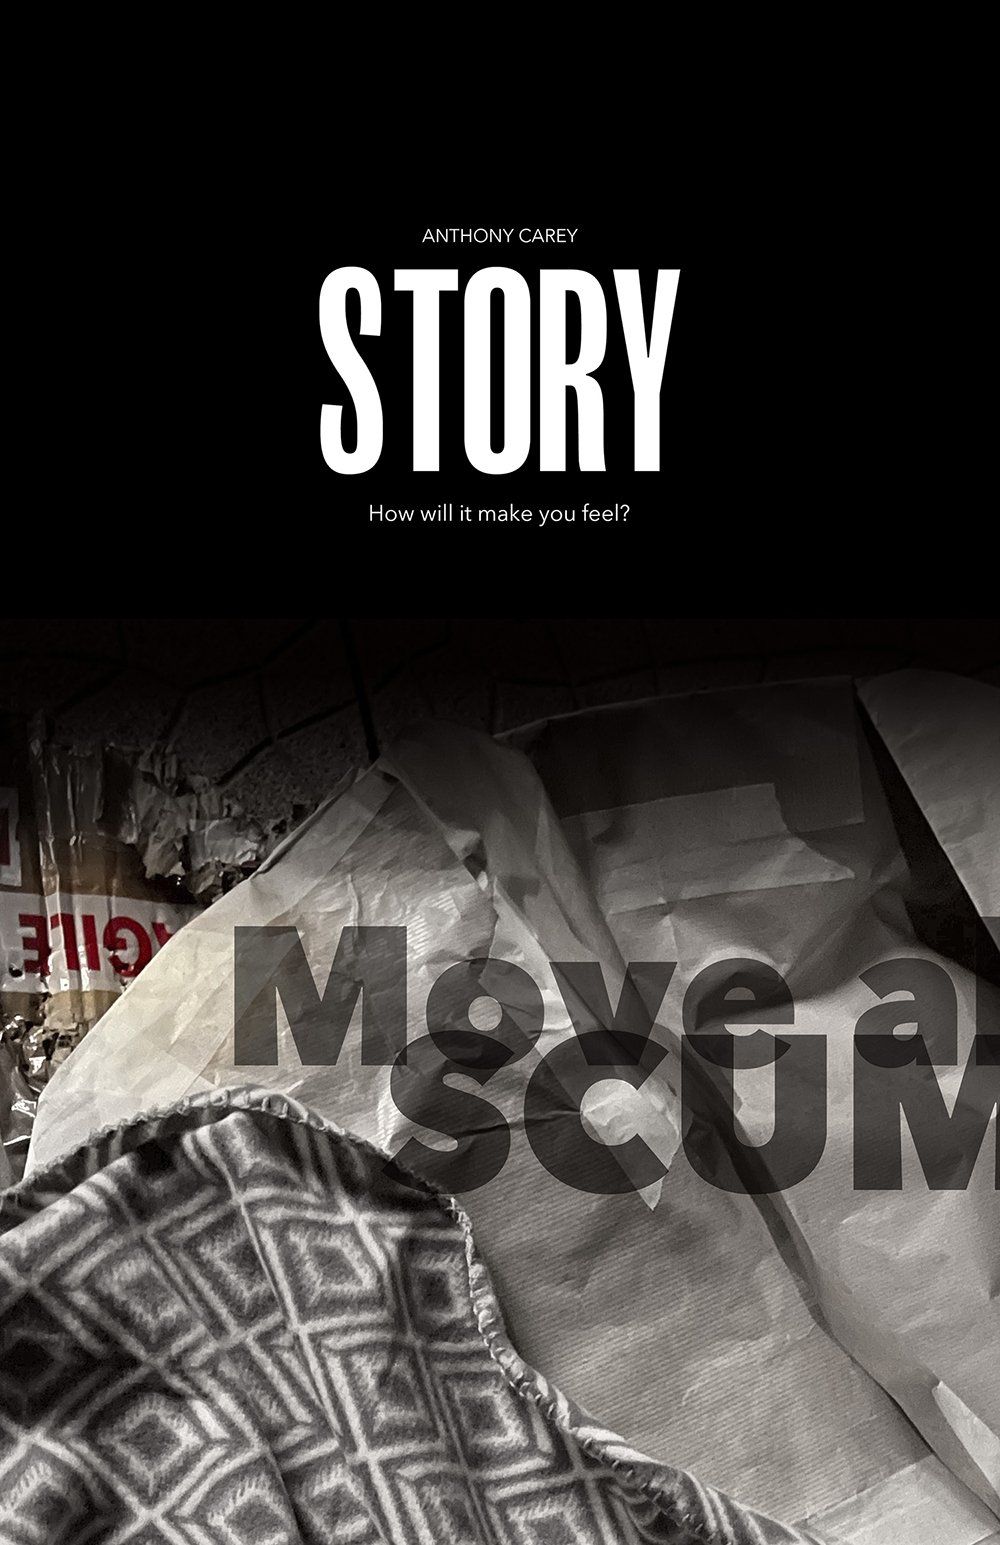 Story film poster showing brown paper coat under blanket with the film title STORY and faded text Move along scum